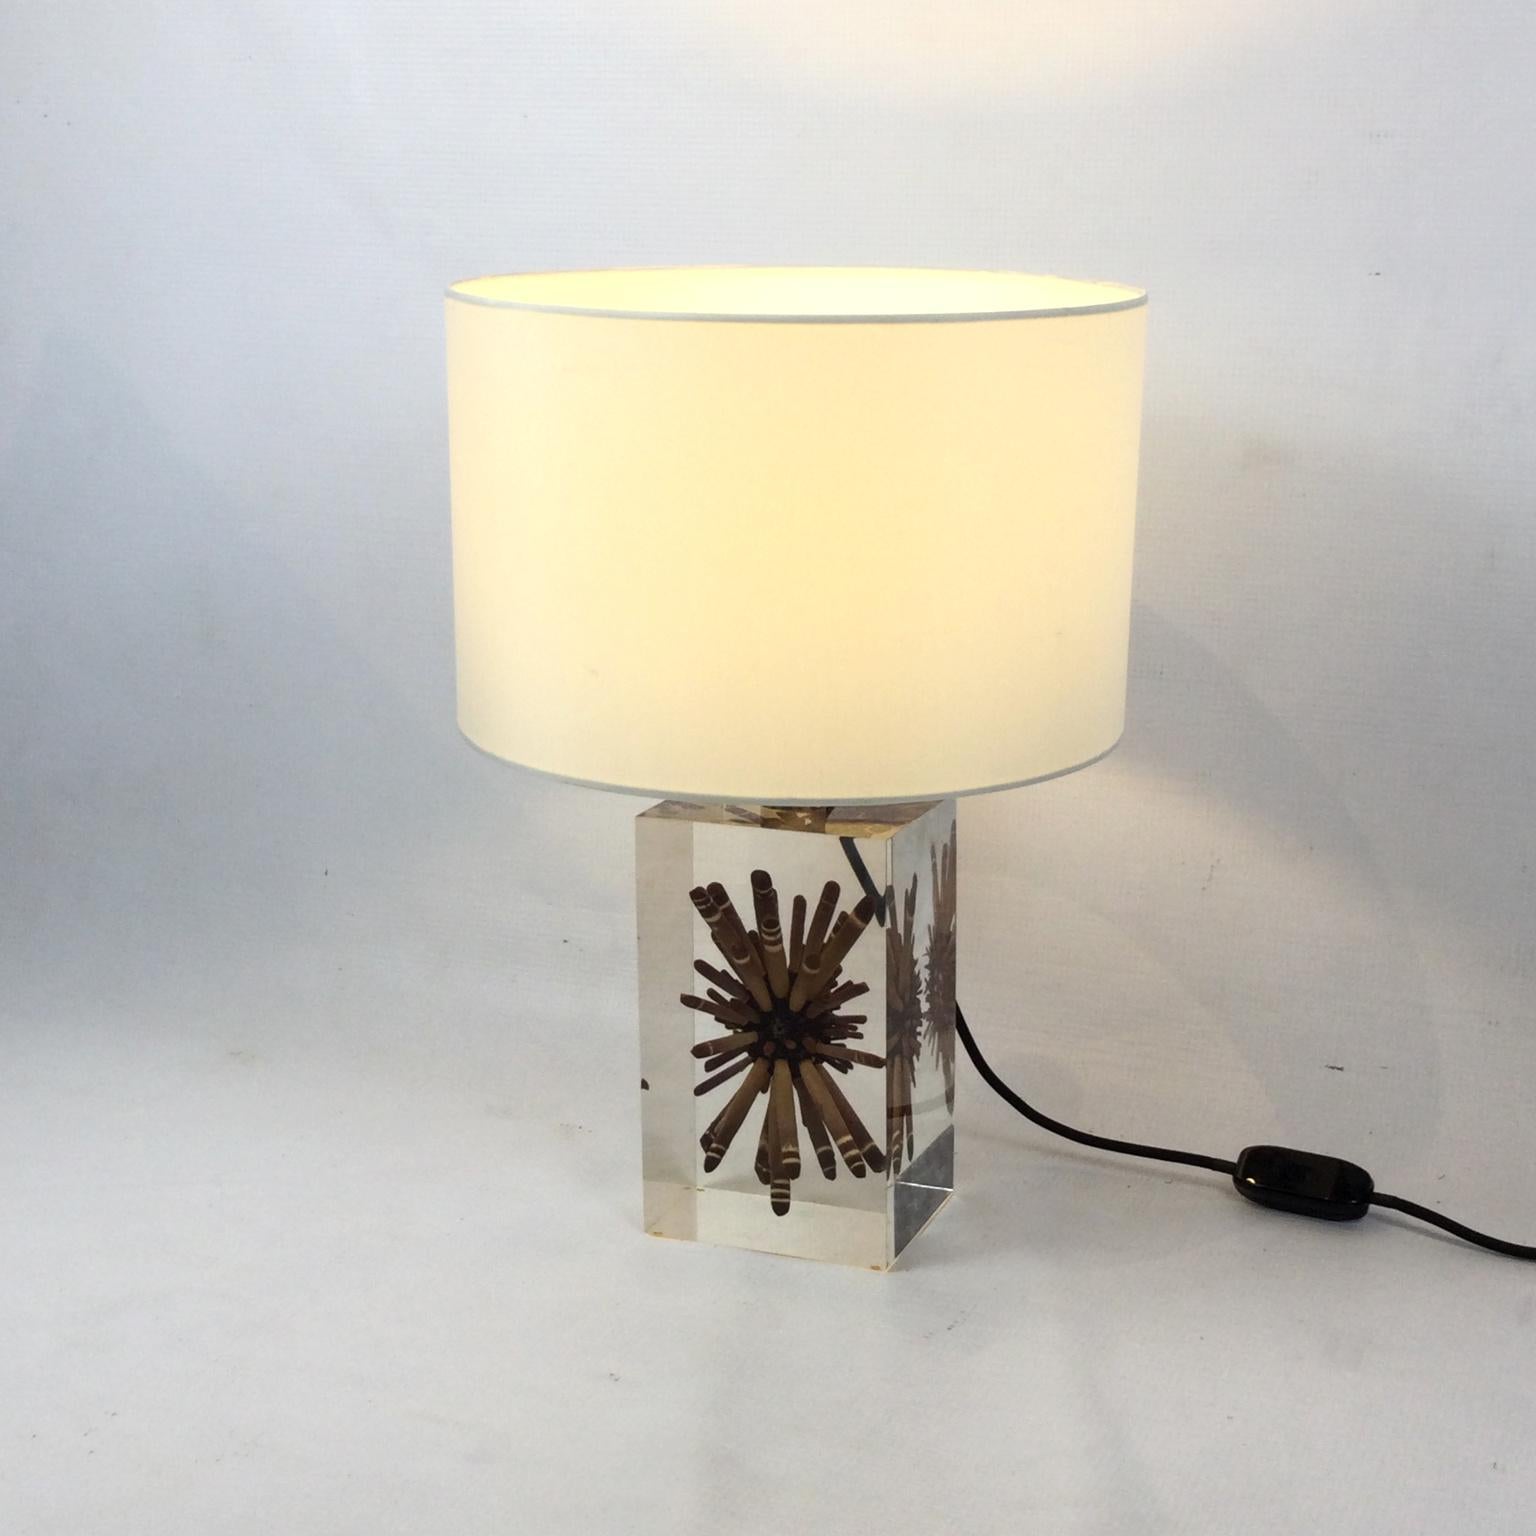 Pierre Giraudon 1970s Large Resin Table Lamp with Tropical Ursin Inclusion For Sale 2